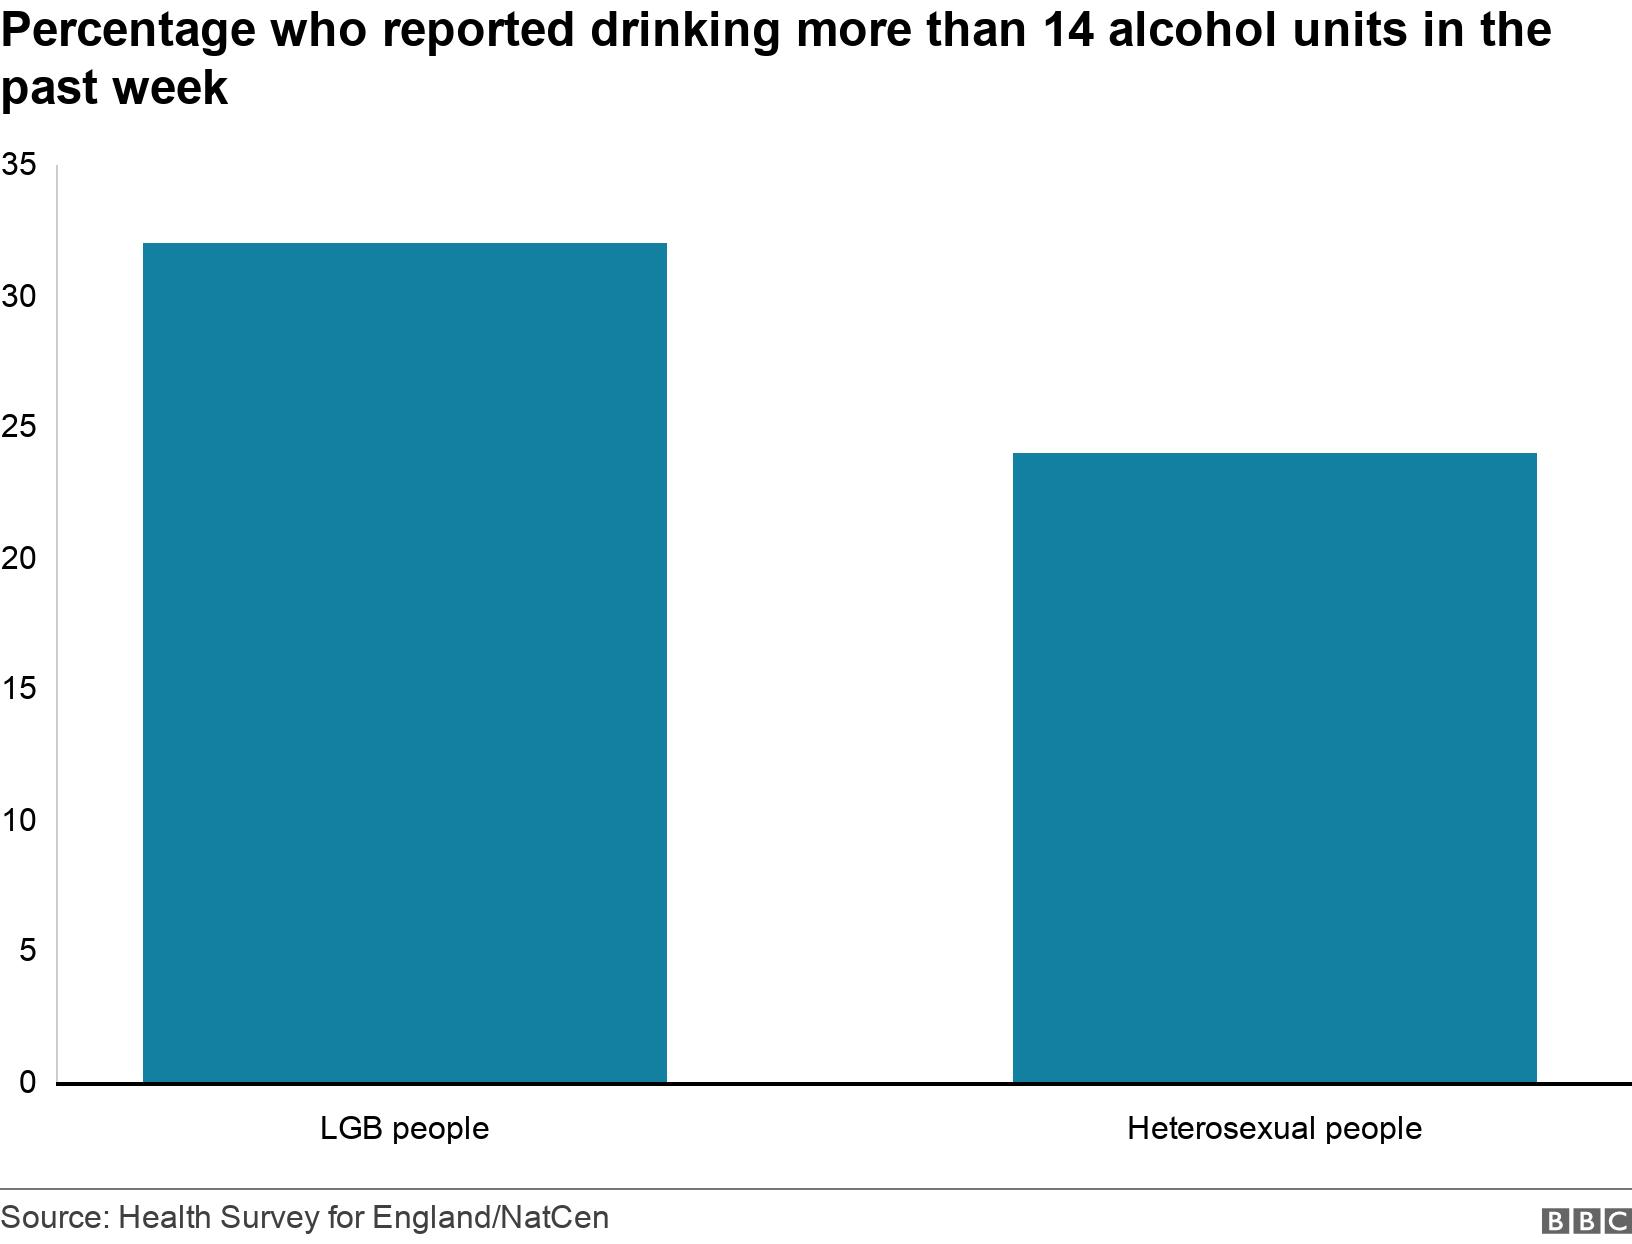 Percentage who reported drinking more than 14 alcohol units in the past week. . .